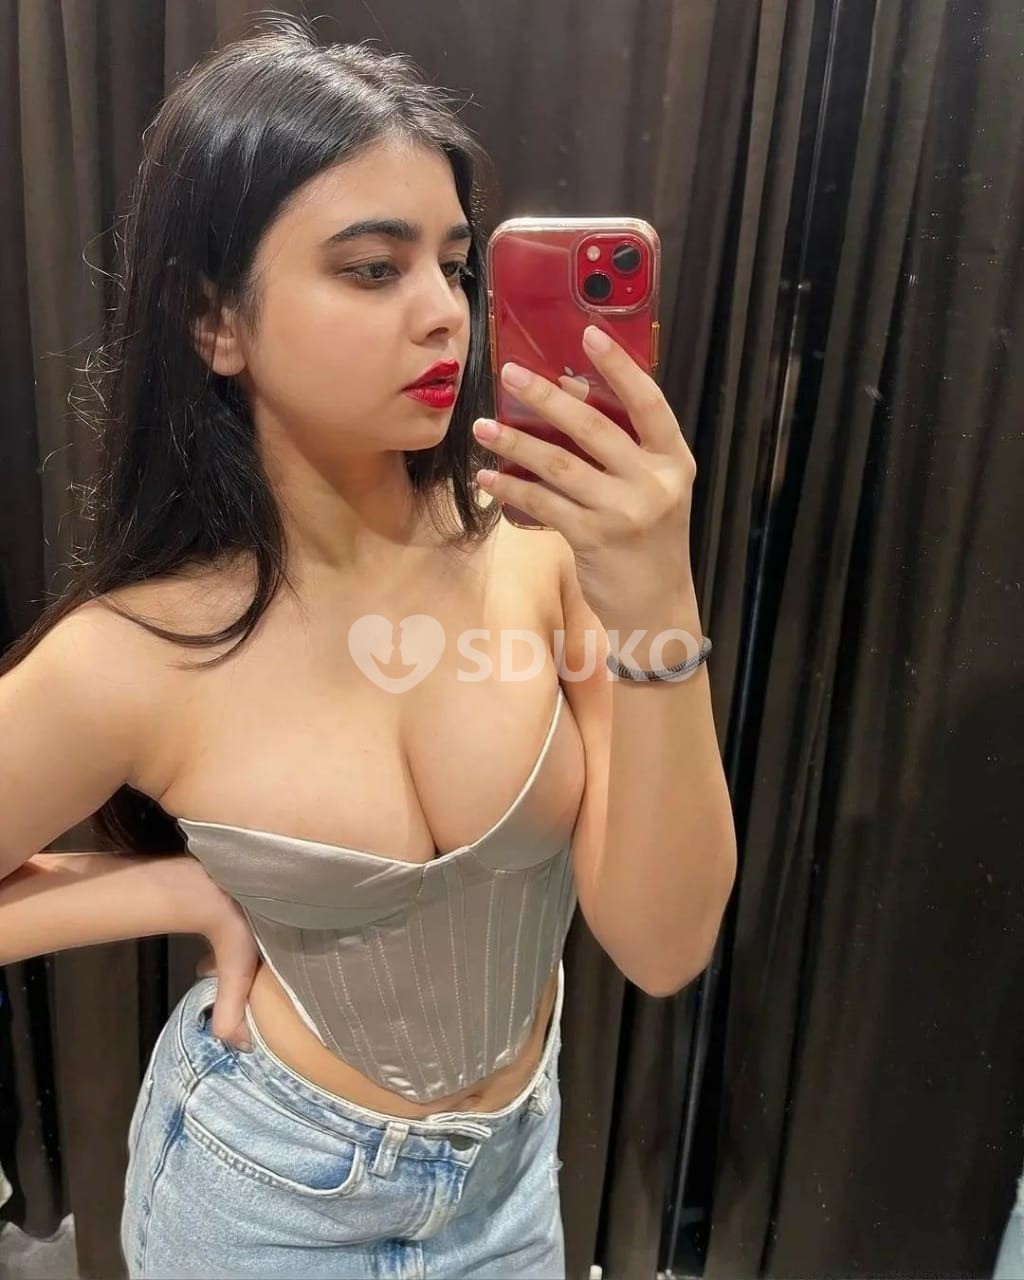 HYDERABAD ALL AREA VIP TODAY ;((LOW PRICE ESCORT 🥰SERVICE 100% SAFE AND SECURE ANYTIME CALL ME 24 X 7 SERVICE AVAILAB